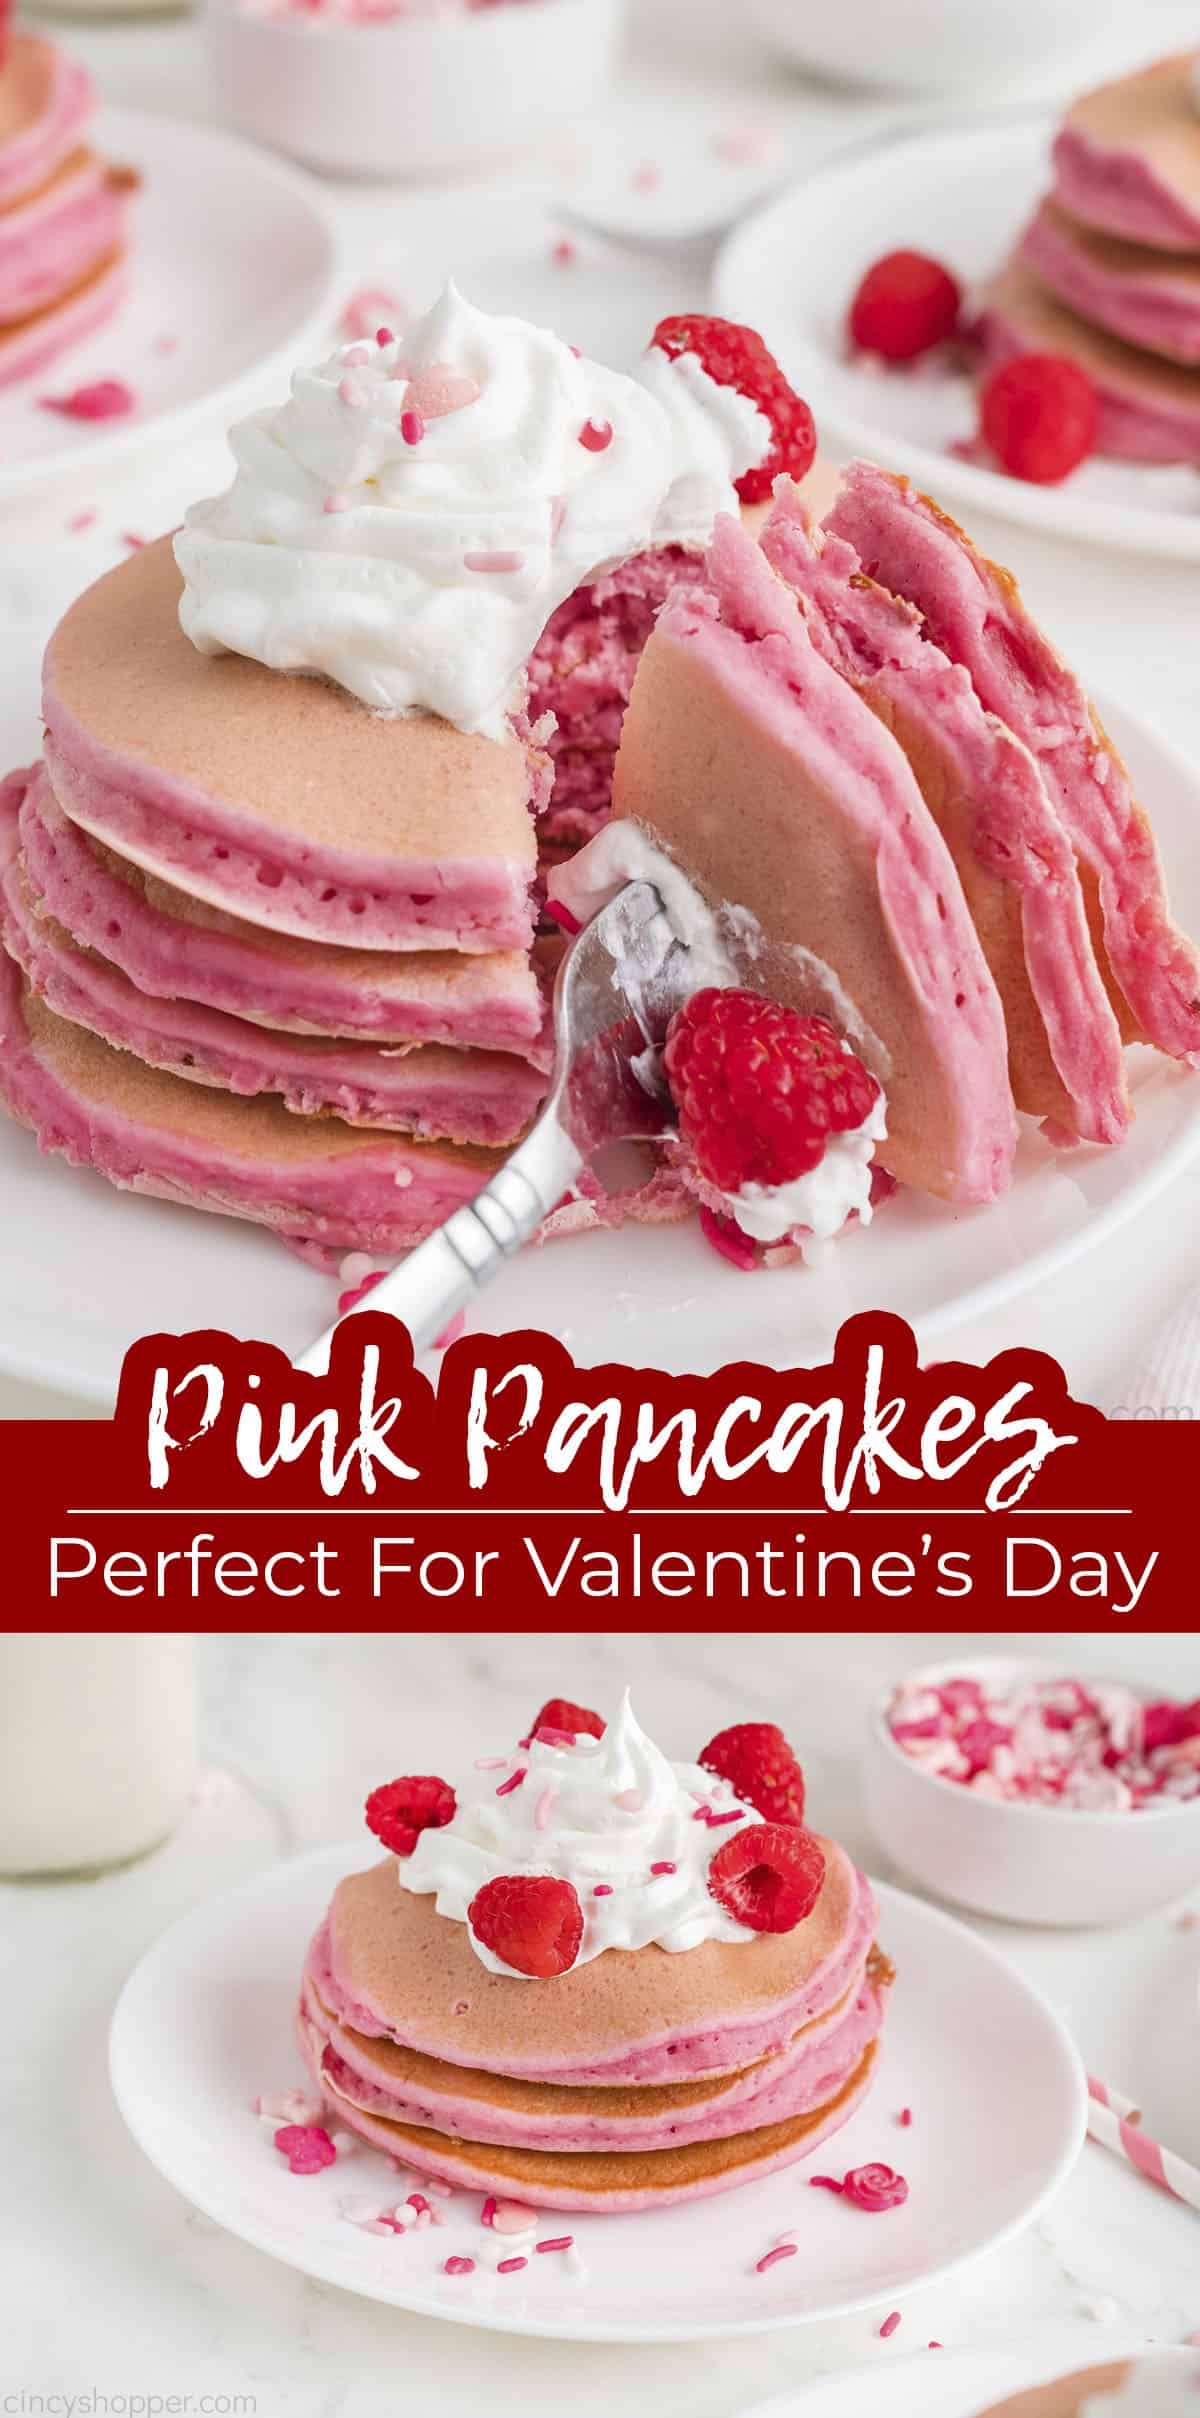 Text on image Pink Pancakes Perfect for Valentine's Day!